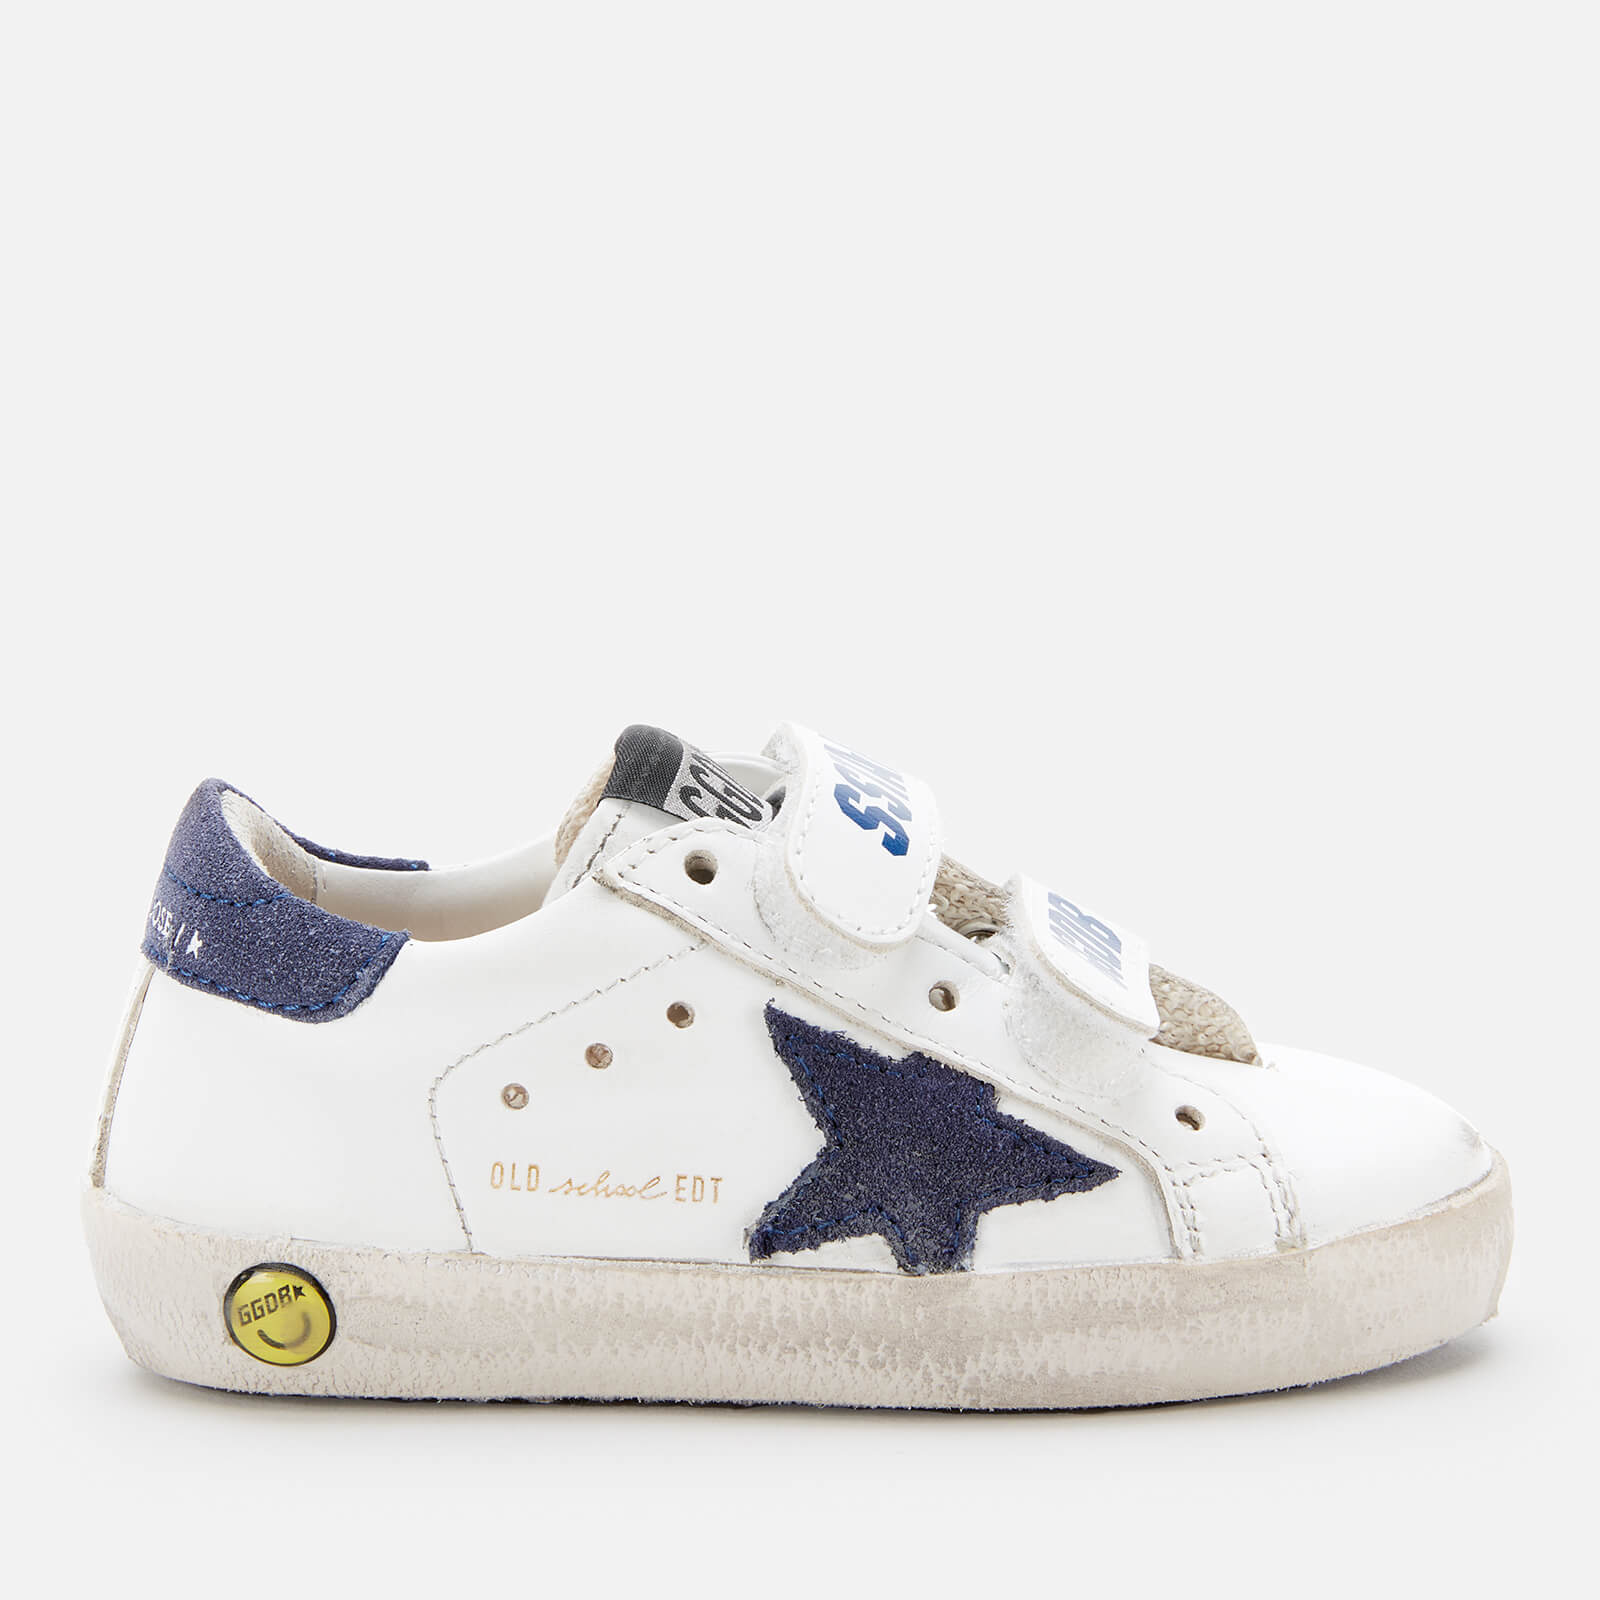 Golden Goose Toddlers' Leather Upper Suede Star And Heel Trainers - White/Blue Depths - UK 3 Infant